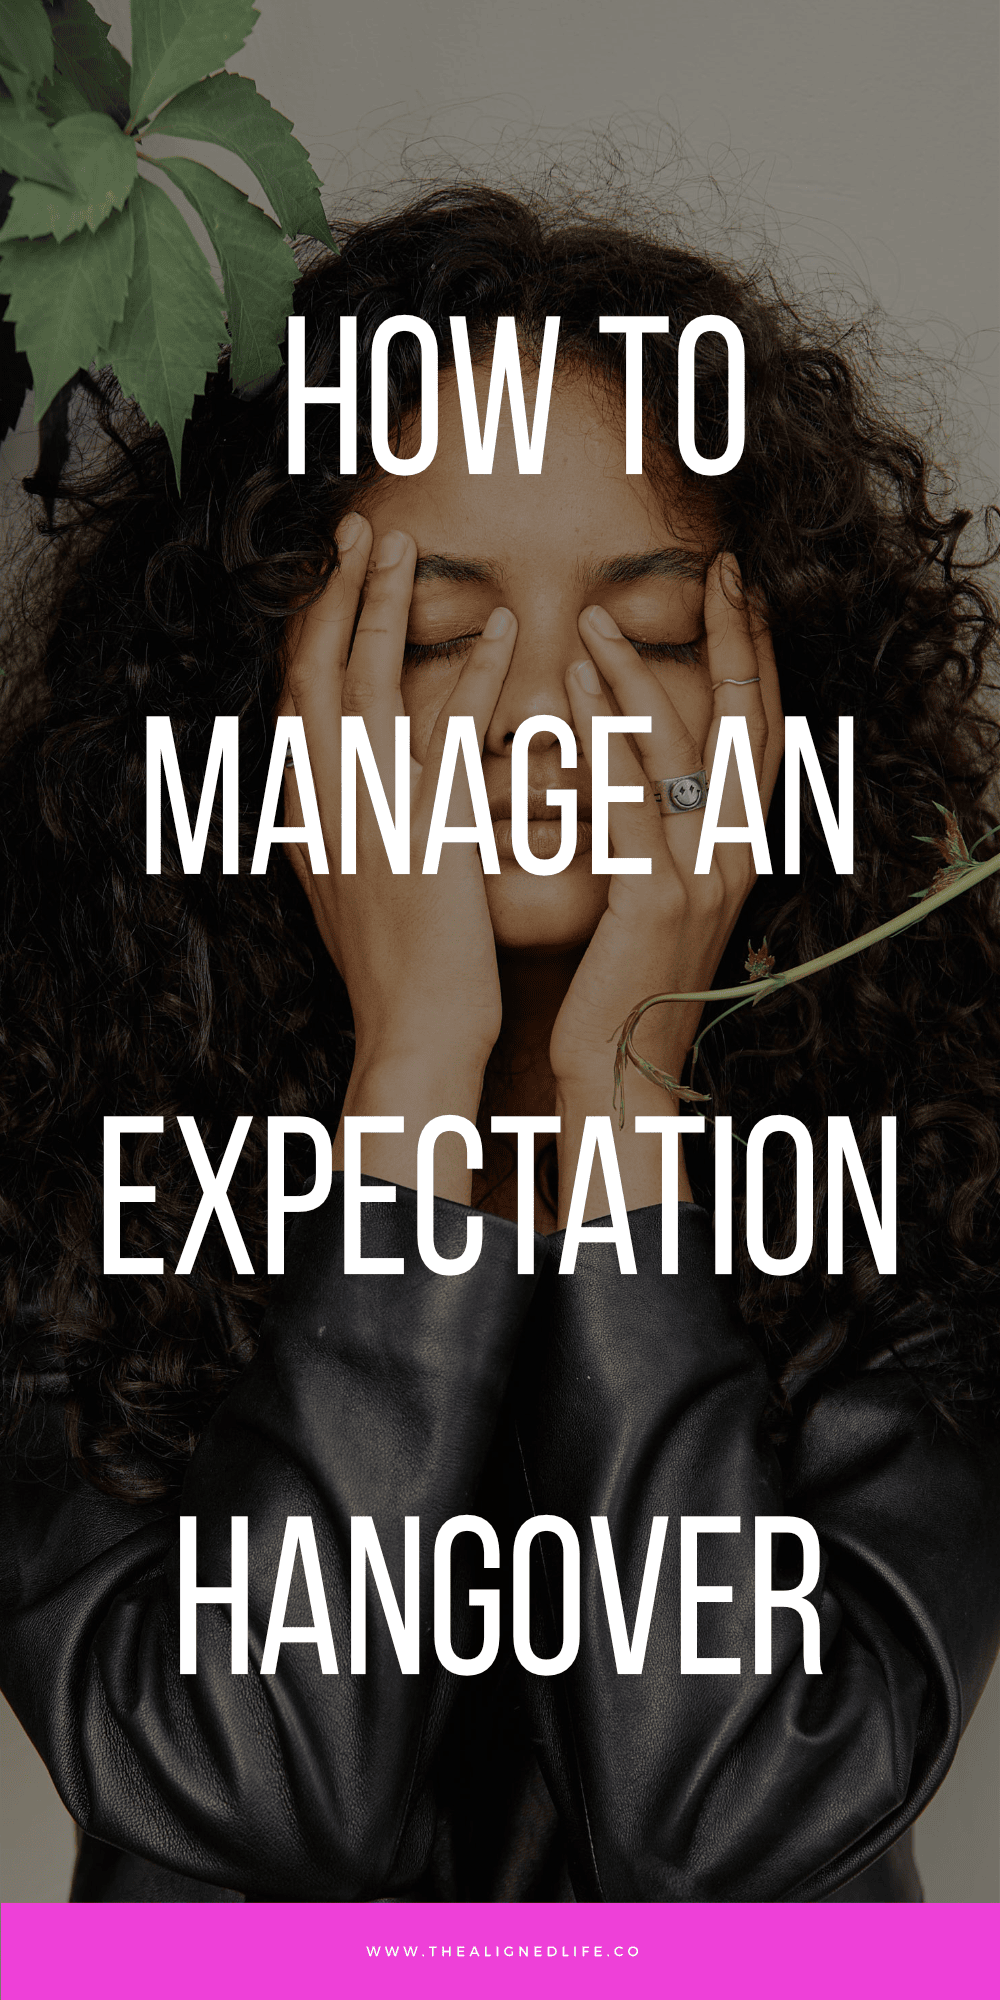 How To Manage An Expectation Hangover